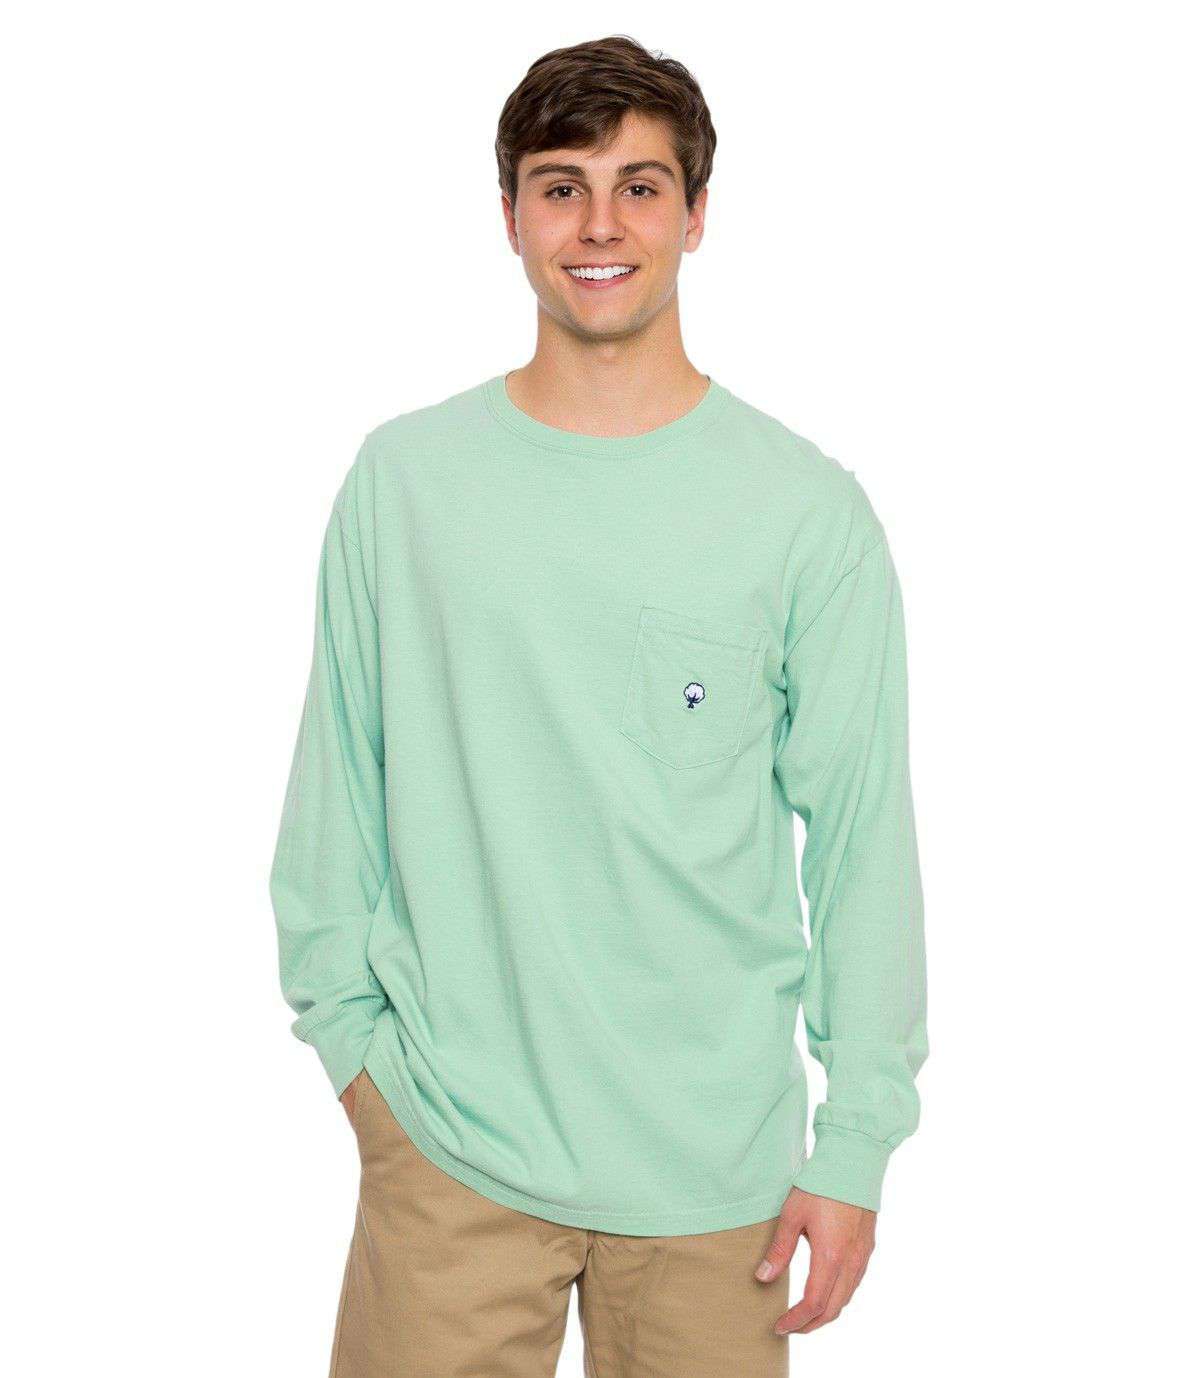 Embroidered Long Sleeve Pocket Tee in Herbal Mist by The Southern Shirt Co. - Country Club Prep